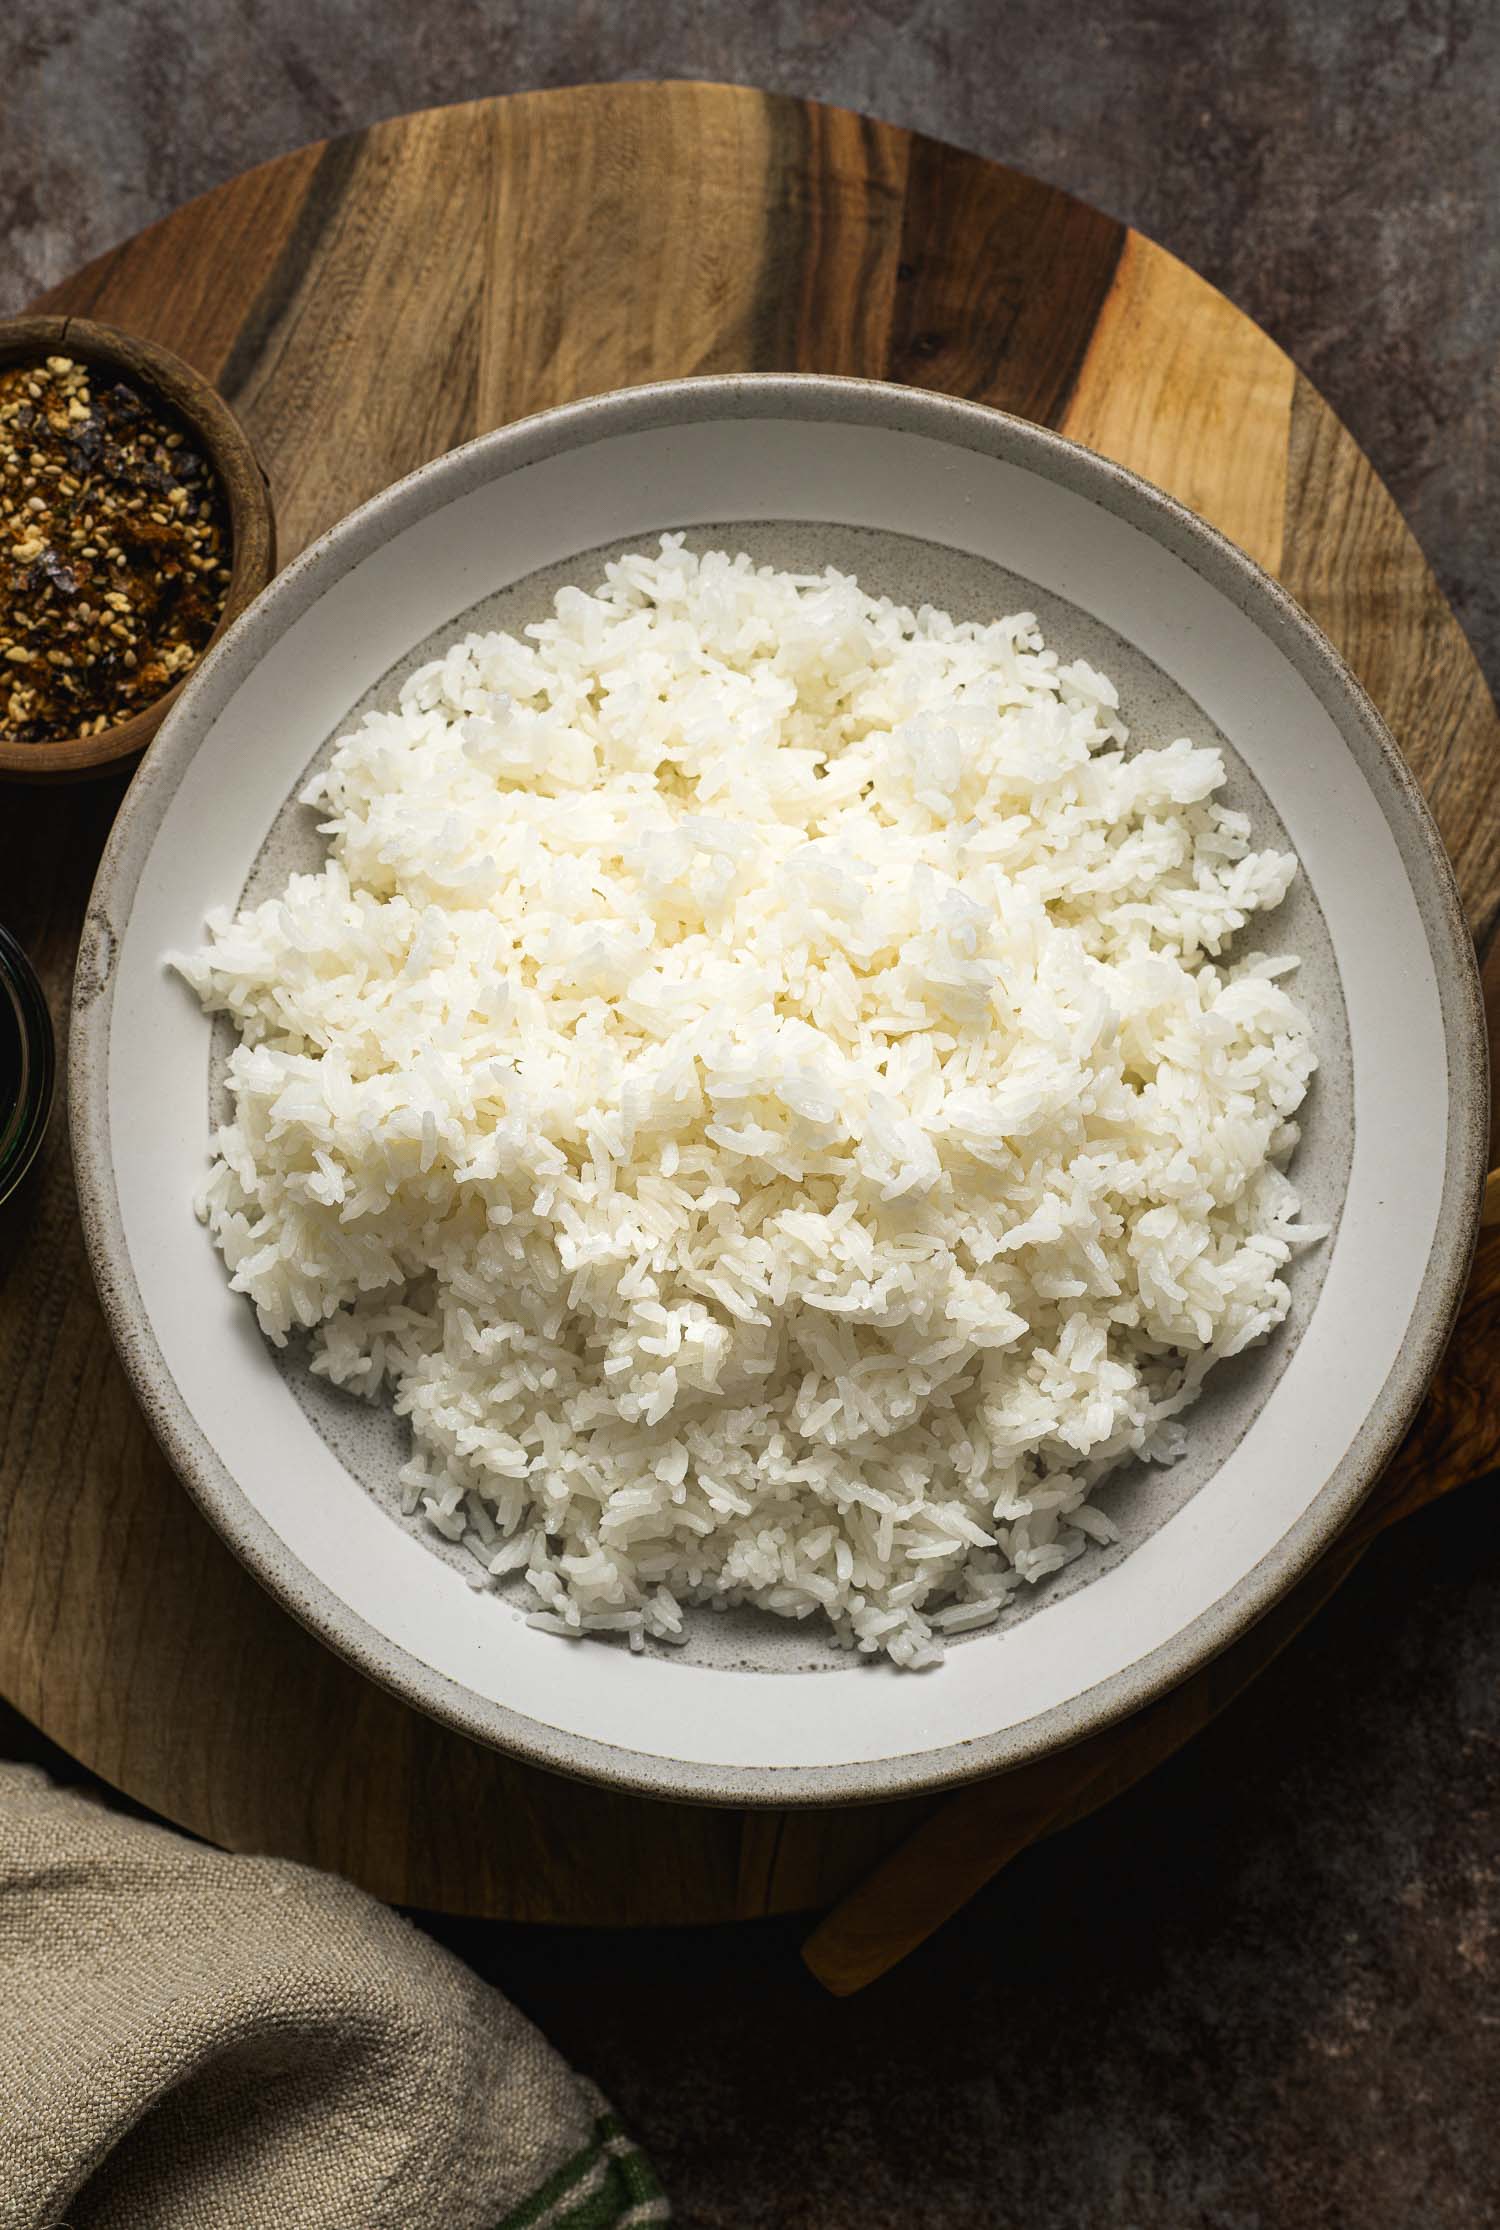 Rice cooker vs. Instant Pot vs. stovetop—which makes the best rice